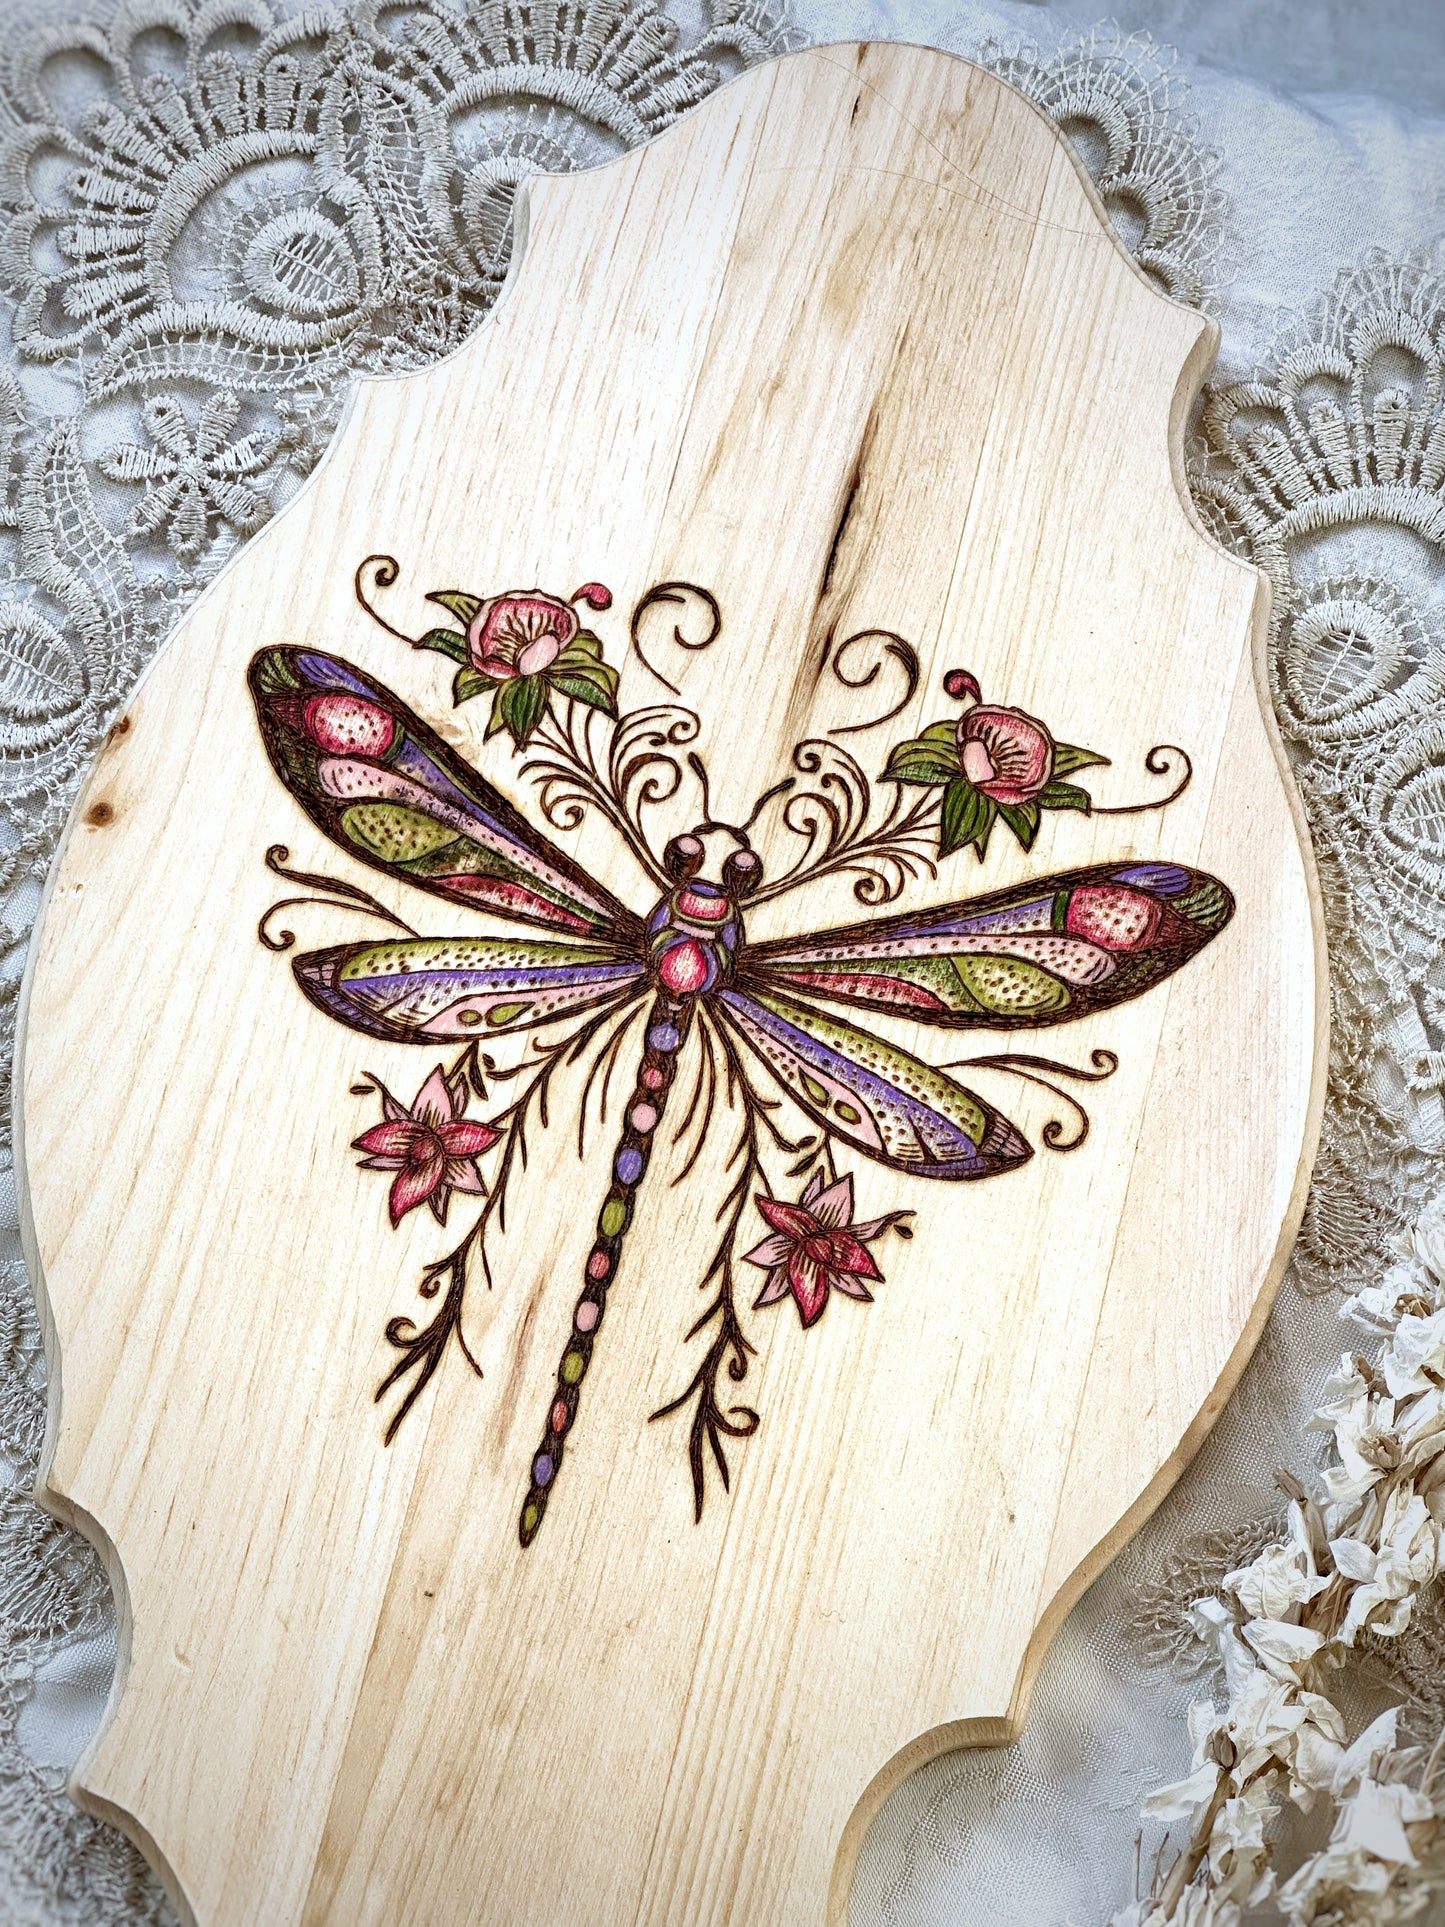 Delicate Dragonfly Wood Burning